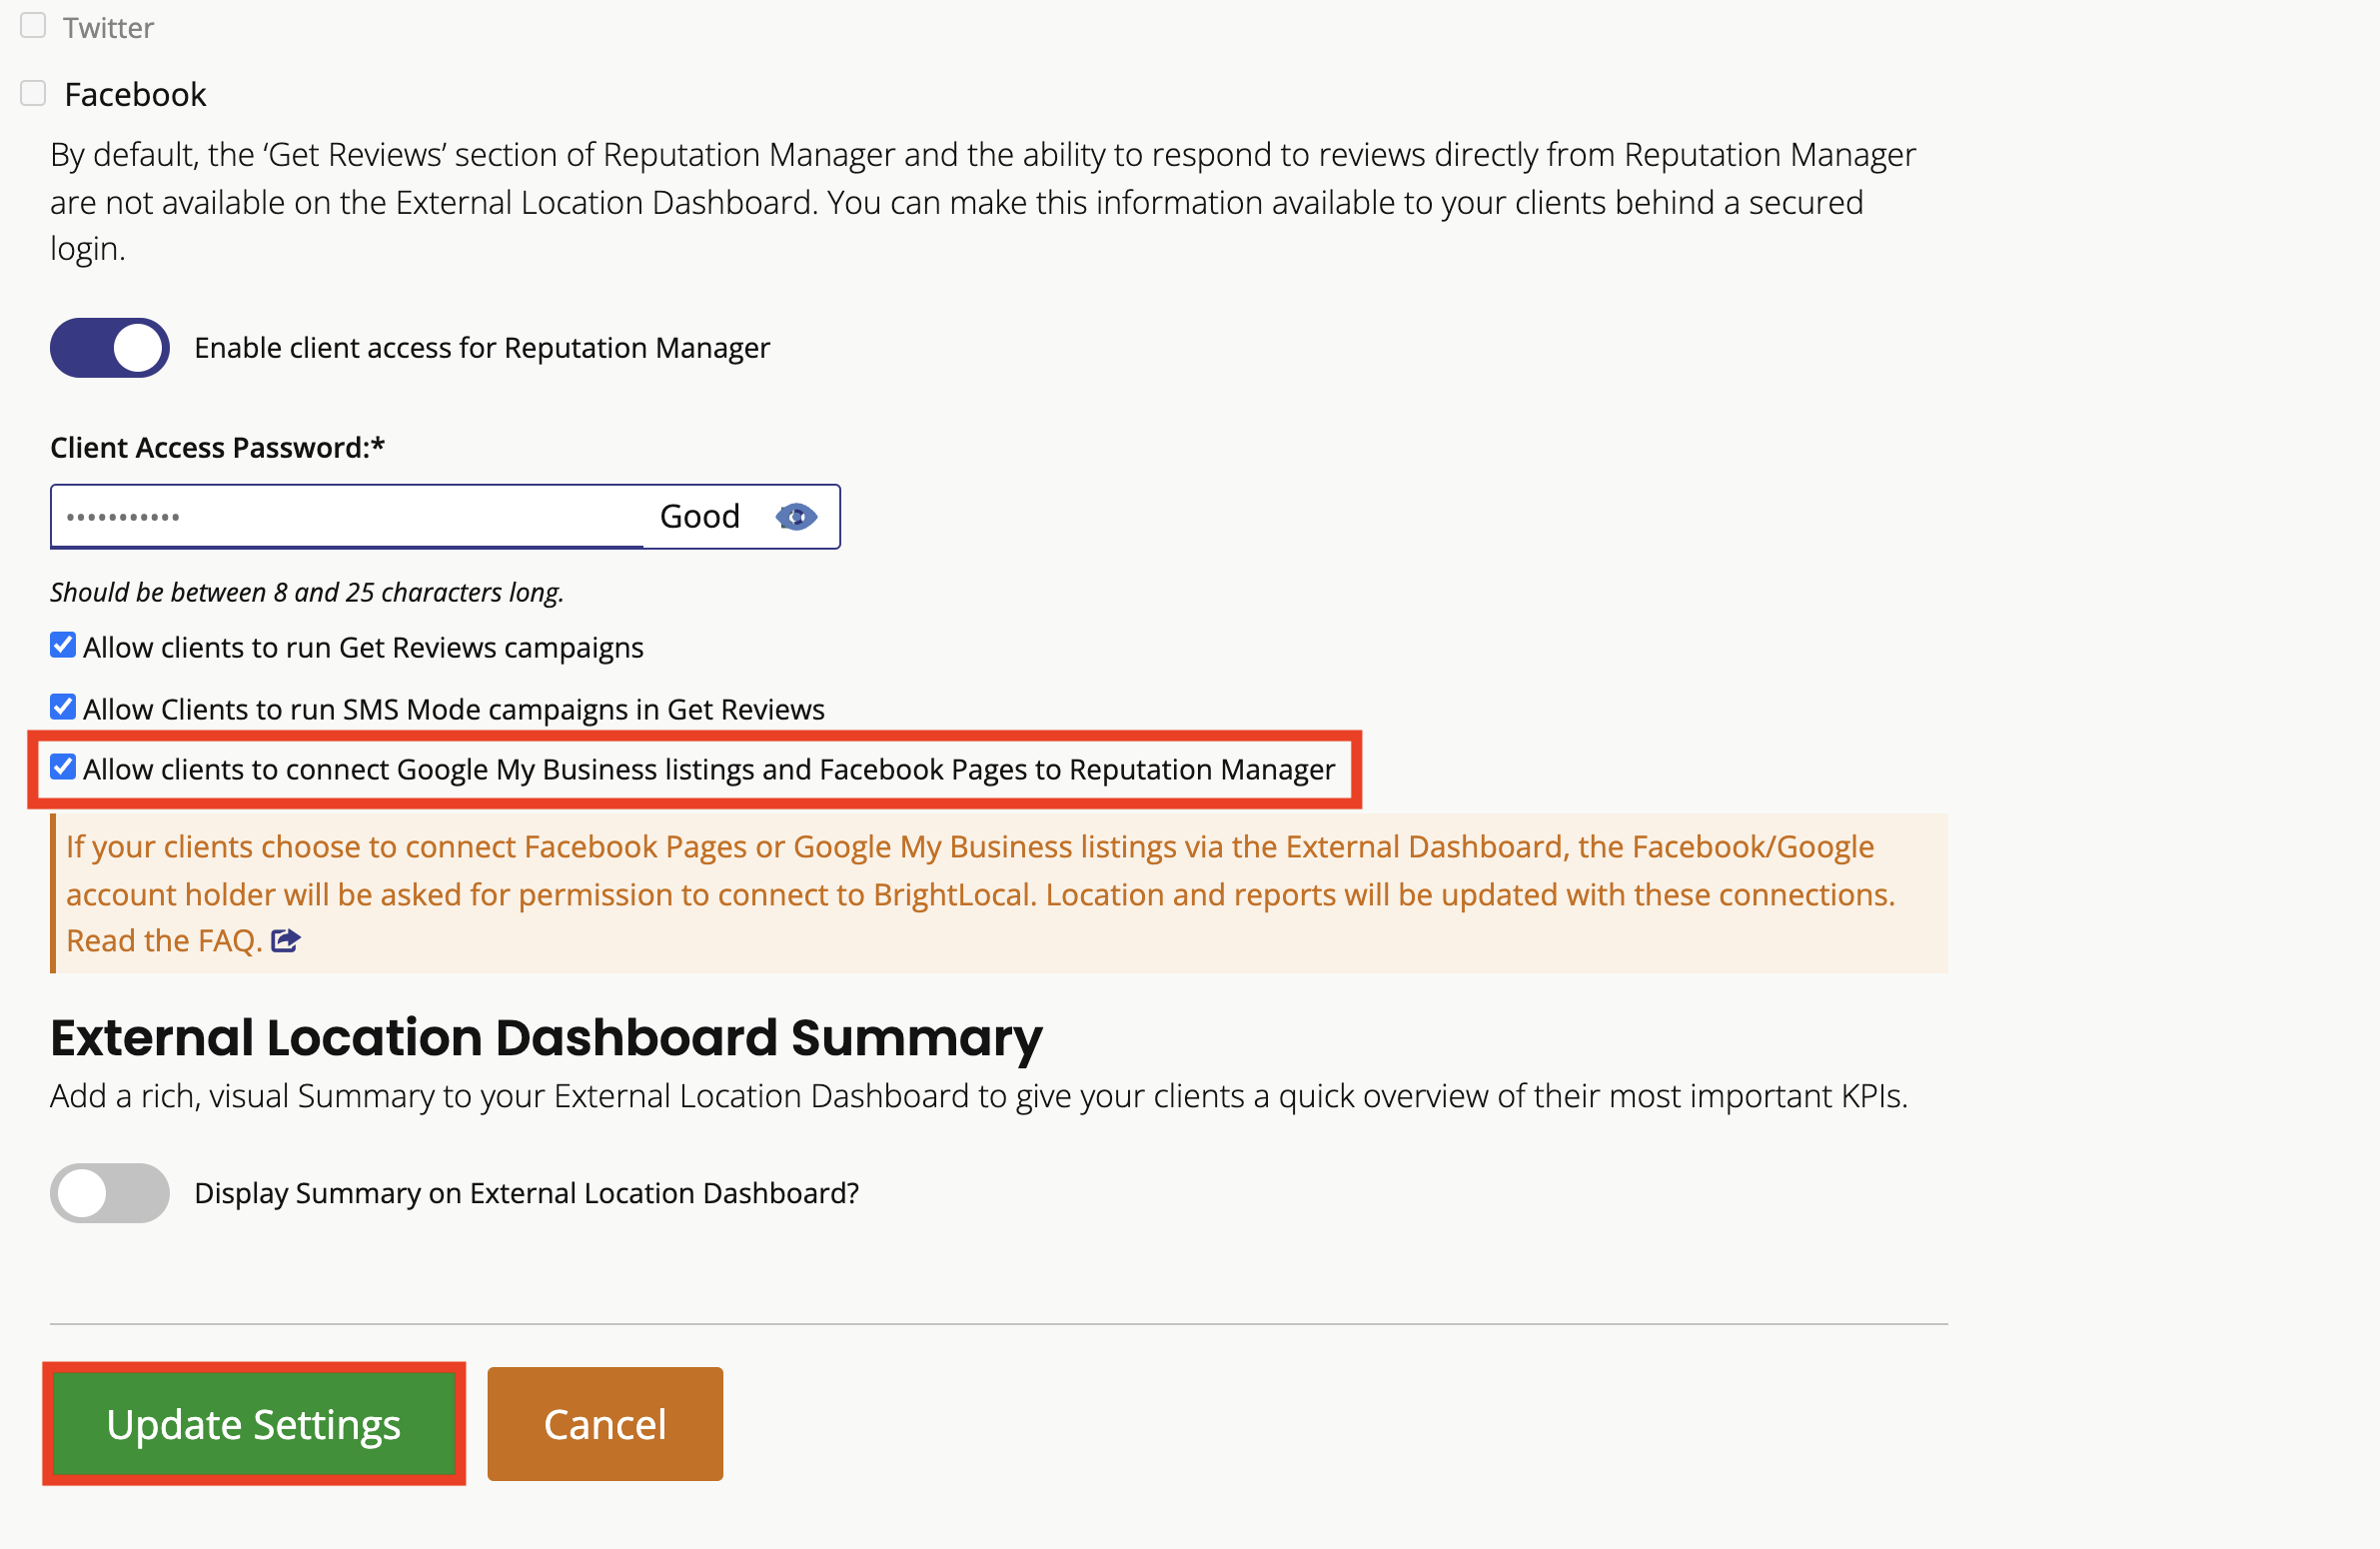 3-How_can_I_allow_clients_to_connect_their_Facebook_Pages_and_Google_Business_Profiles_to_their_Reputation_Manager_reports_via_External_Dashboard__2.png